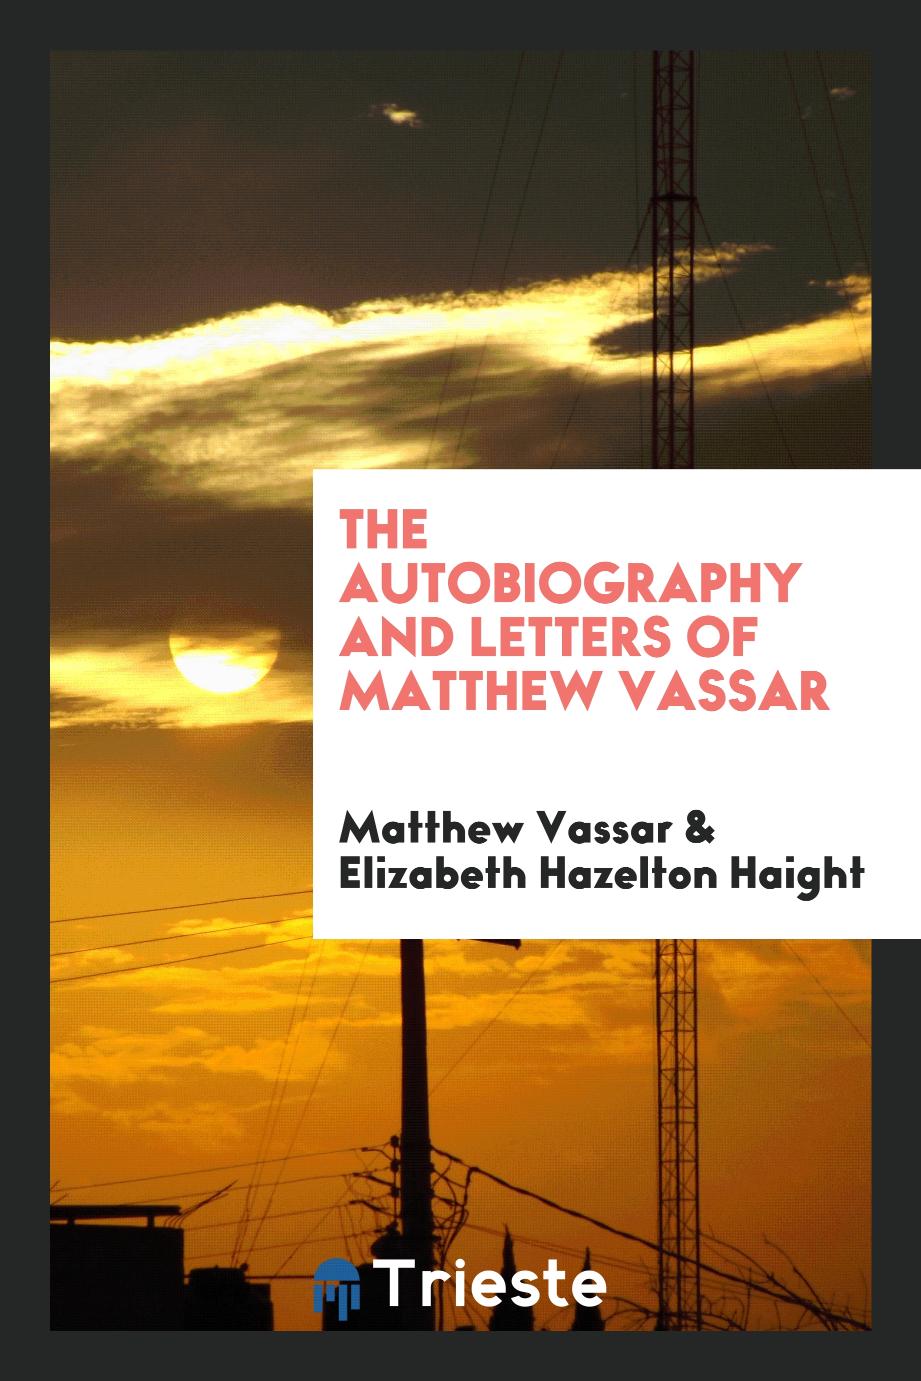 The autobiography and letters of Matthew Vassar